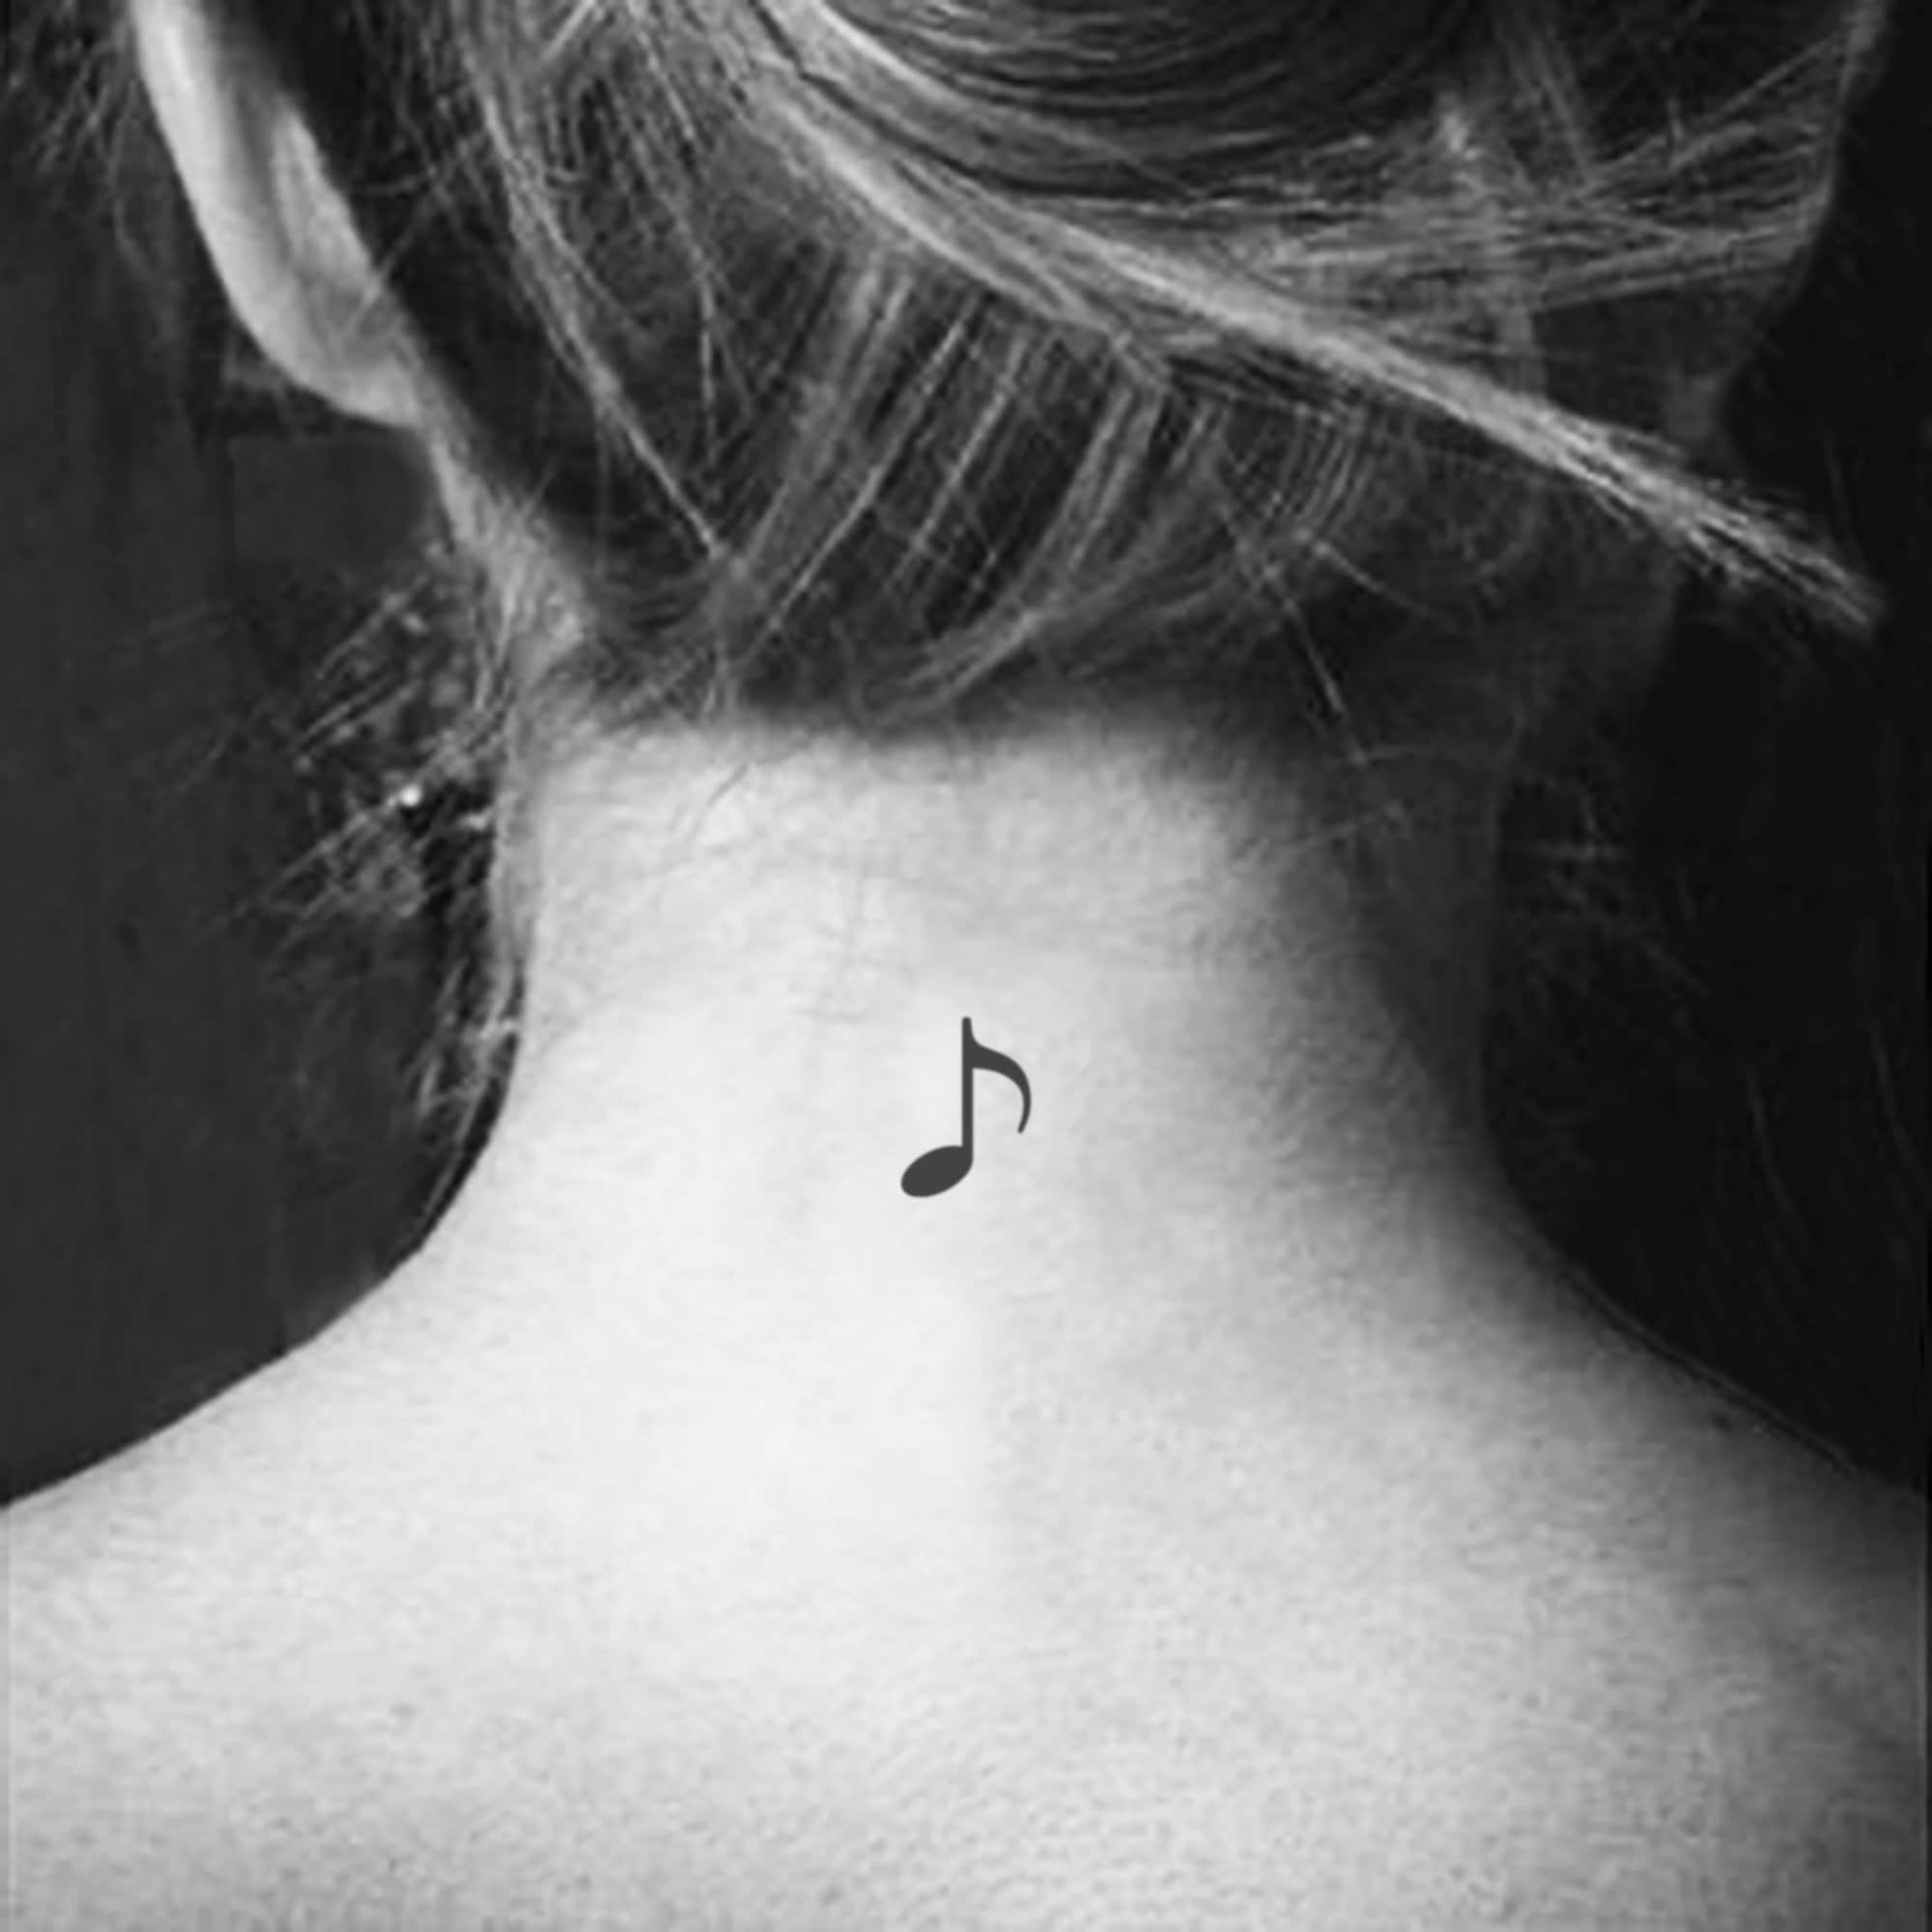 Minimalistic Saturn and music note tattoo located on